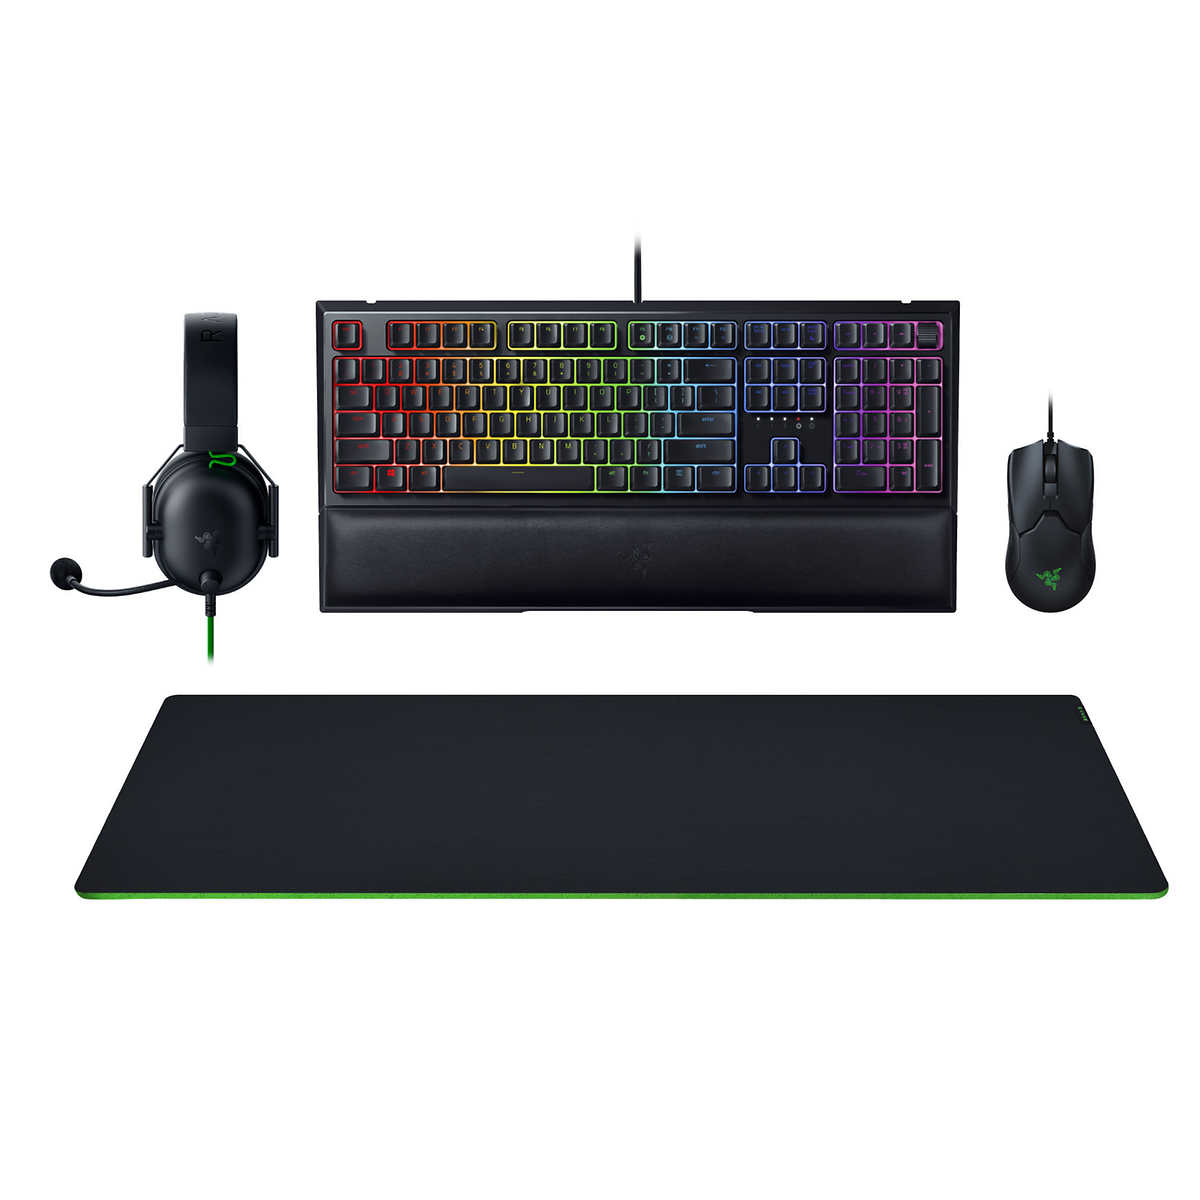 Razer All Star Gaming Bundle Keyboard Mouse Pad Headset Costco